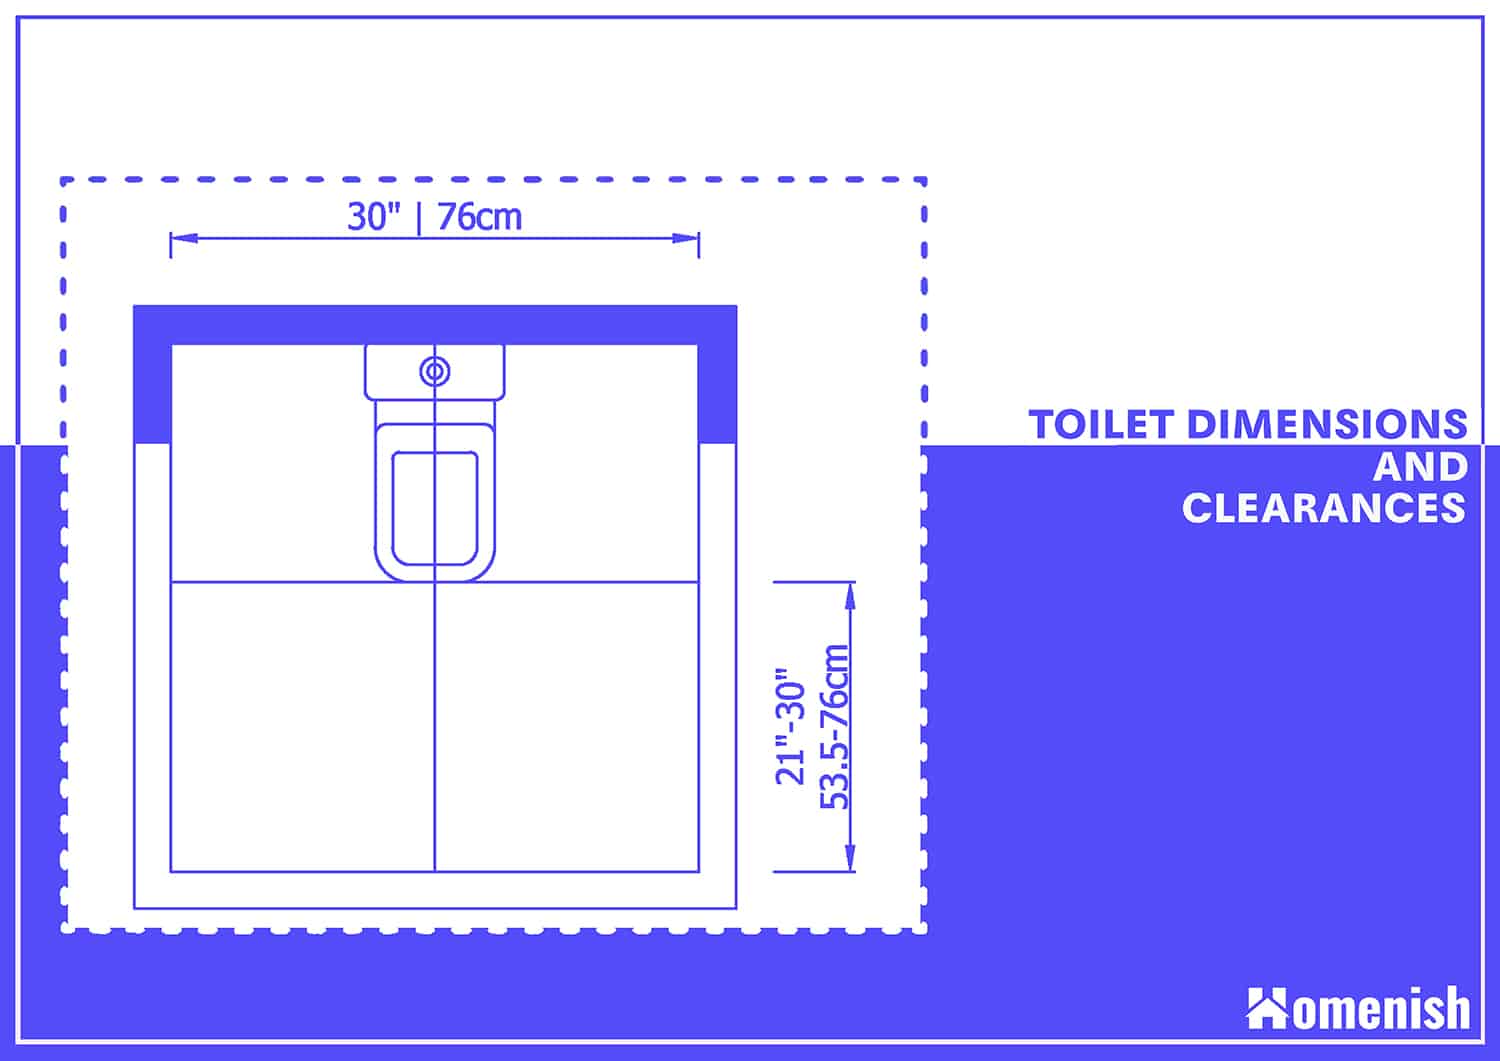 Toilet Dimensions and Clearances